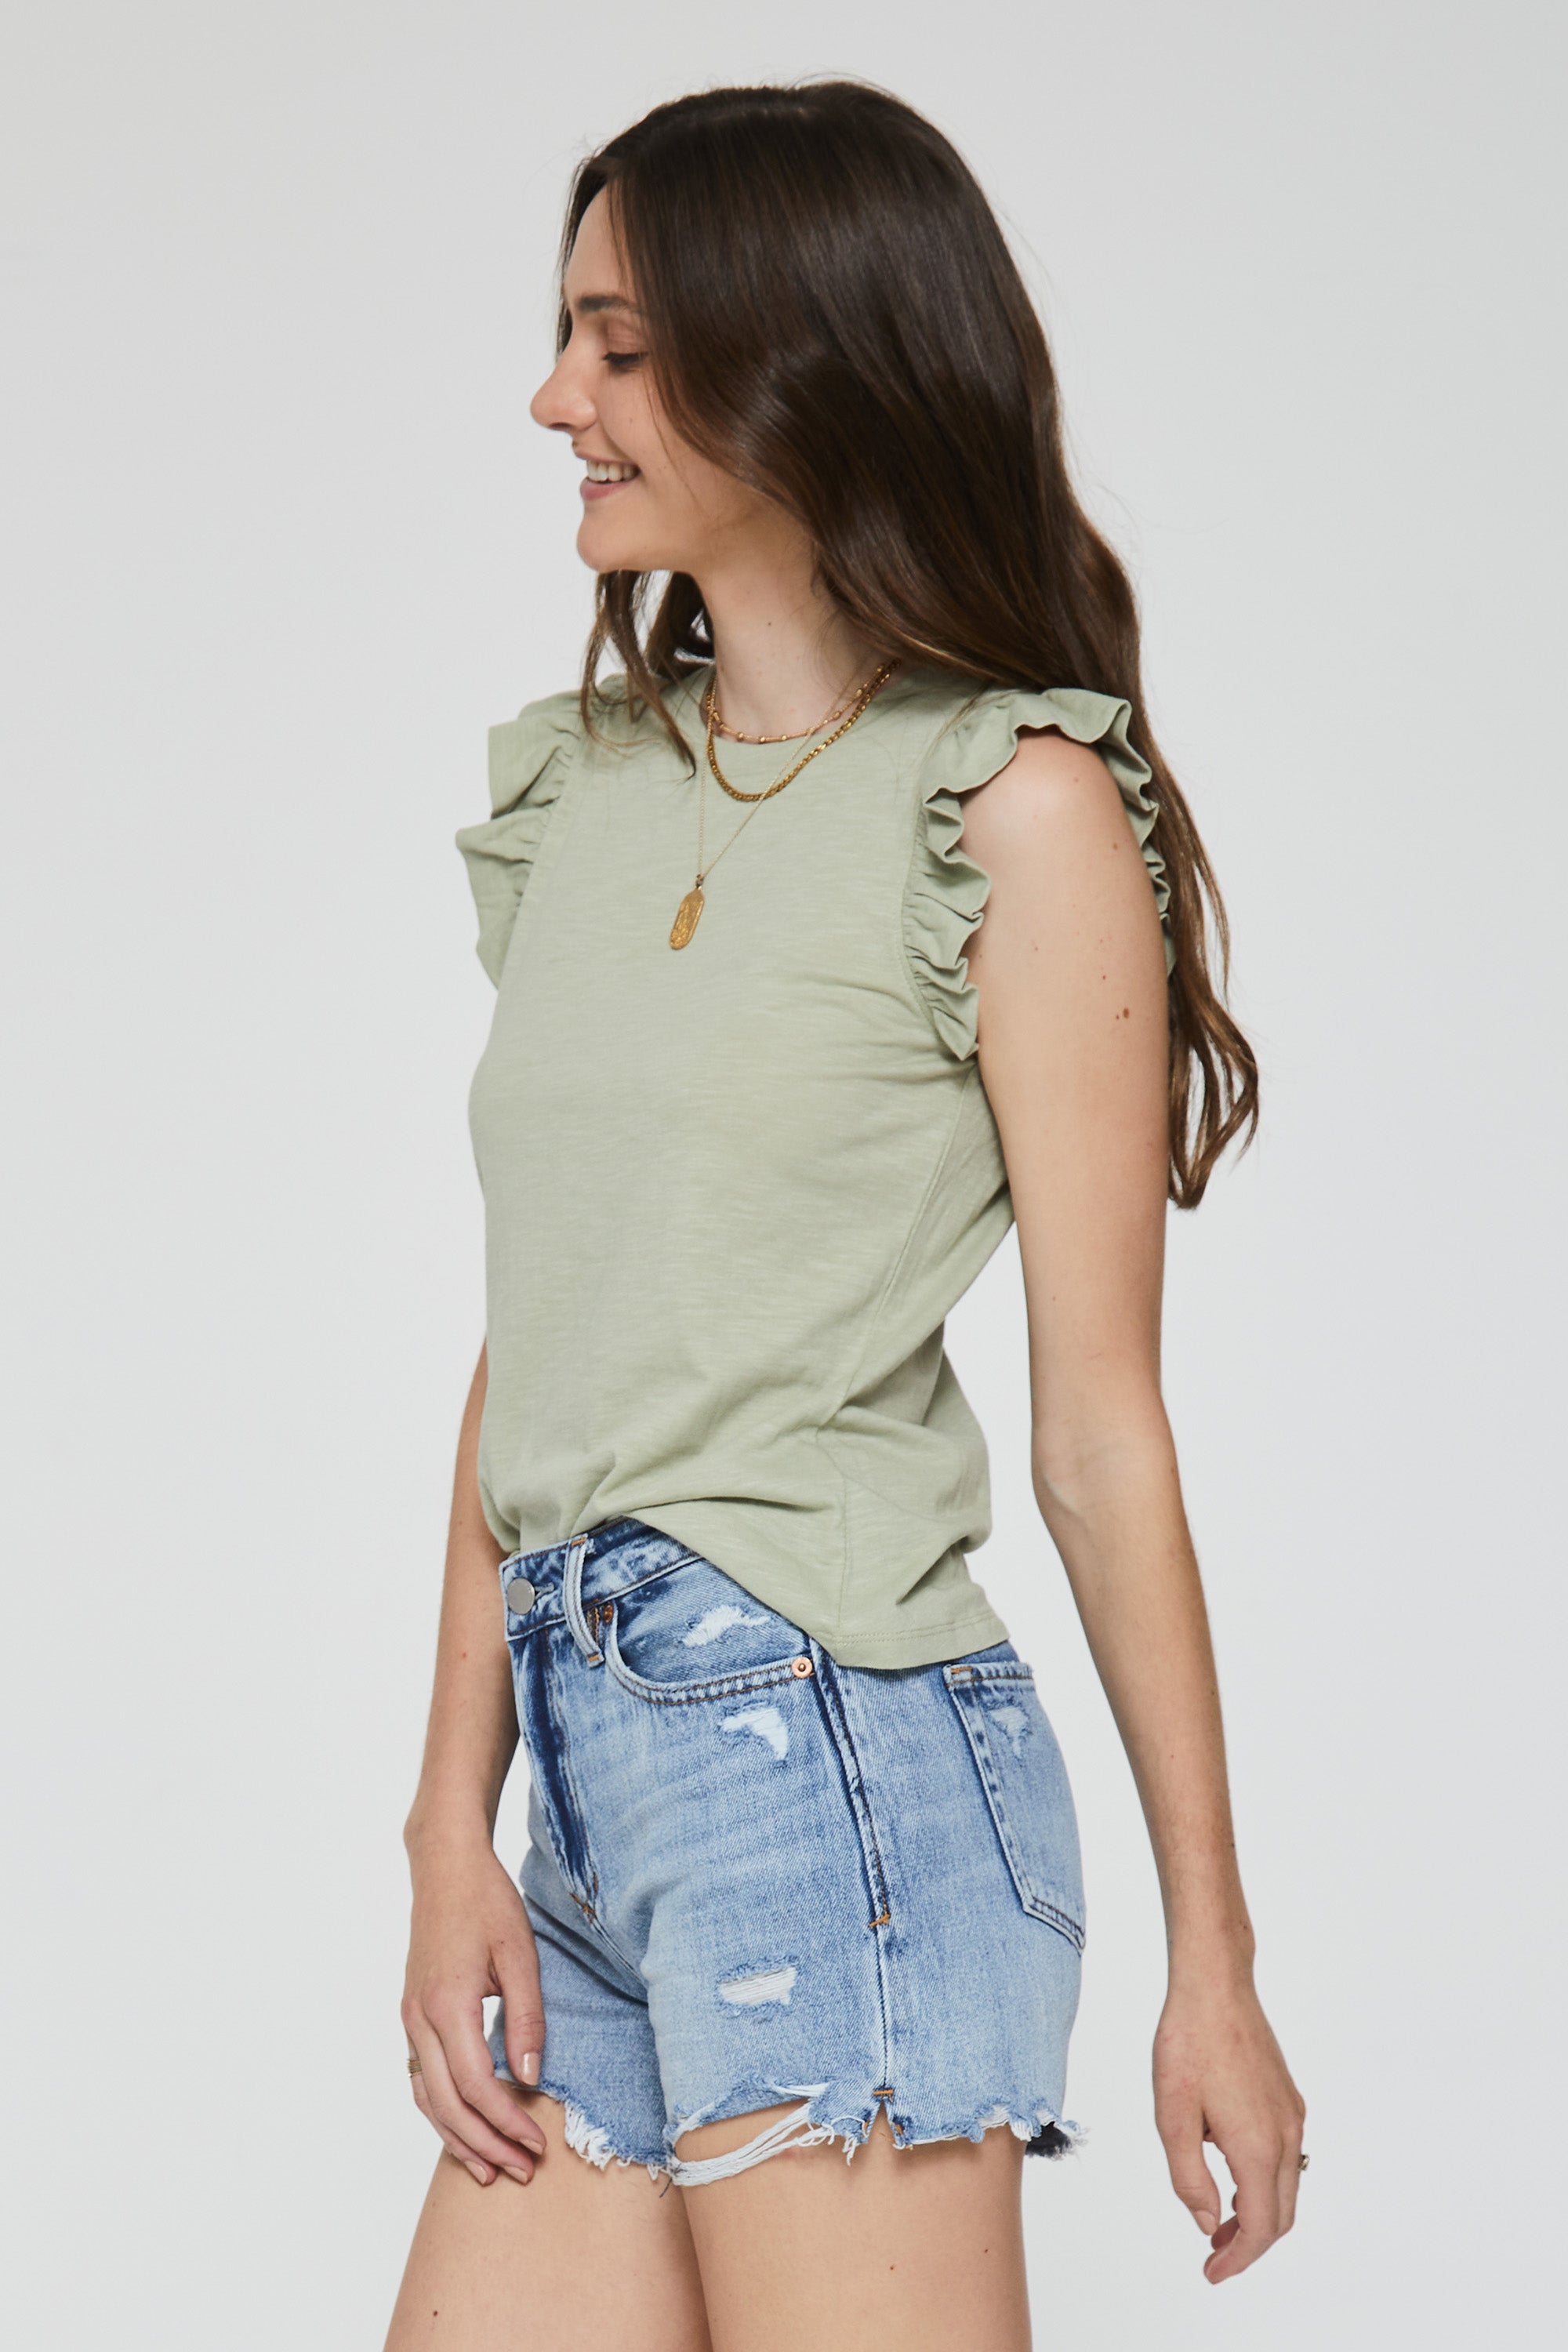 north-ruffle-trimmed-top-pistachio-side-image-another-love-clothing